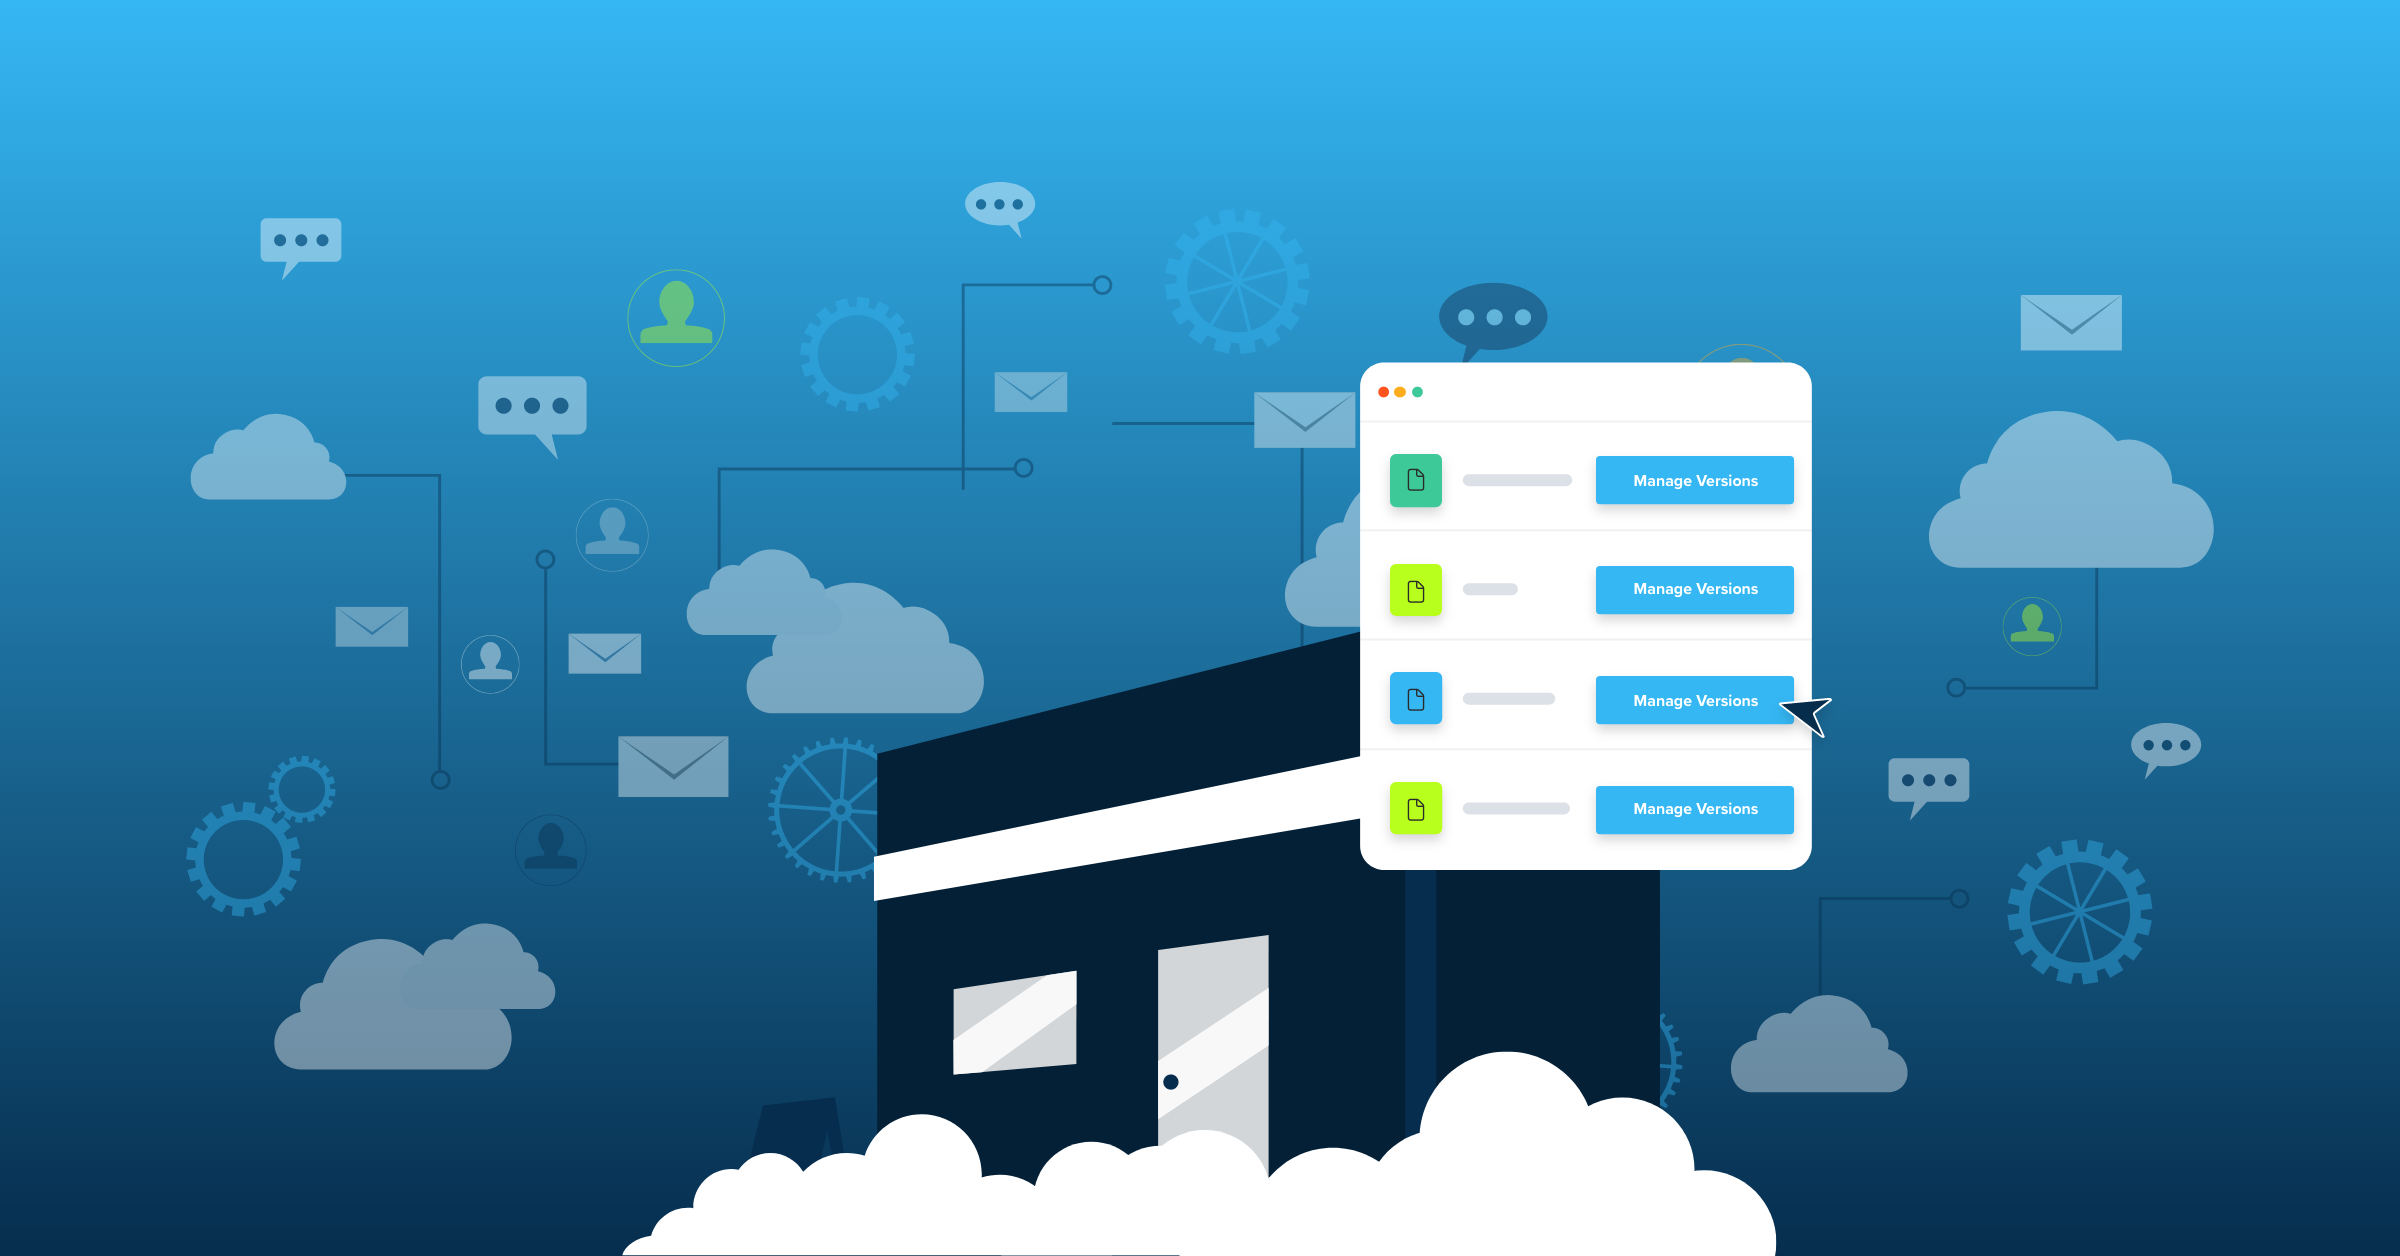 Cloud-based backup concept with a building on a cloud and floating icons of messages, profiles, and gears, symbolizing small business cloud backup solutions.